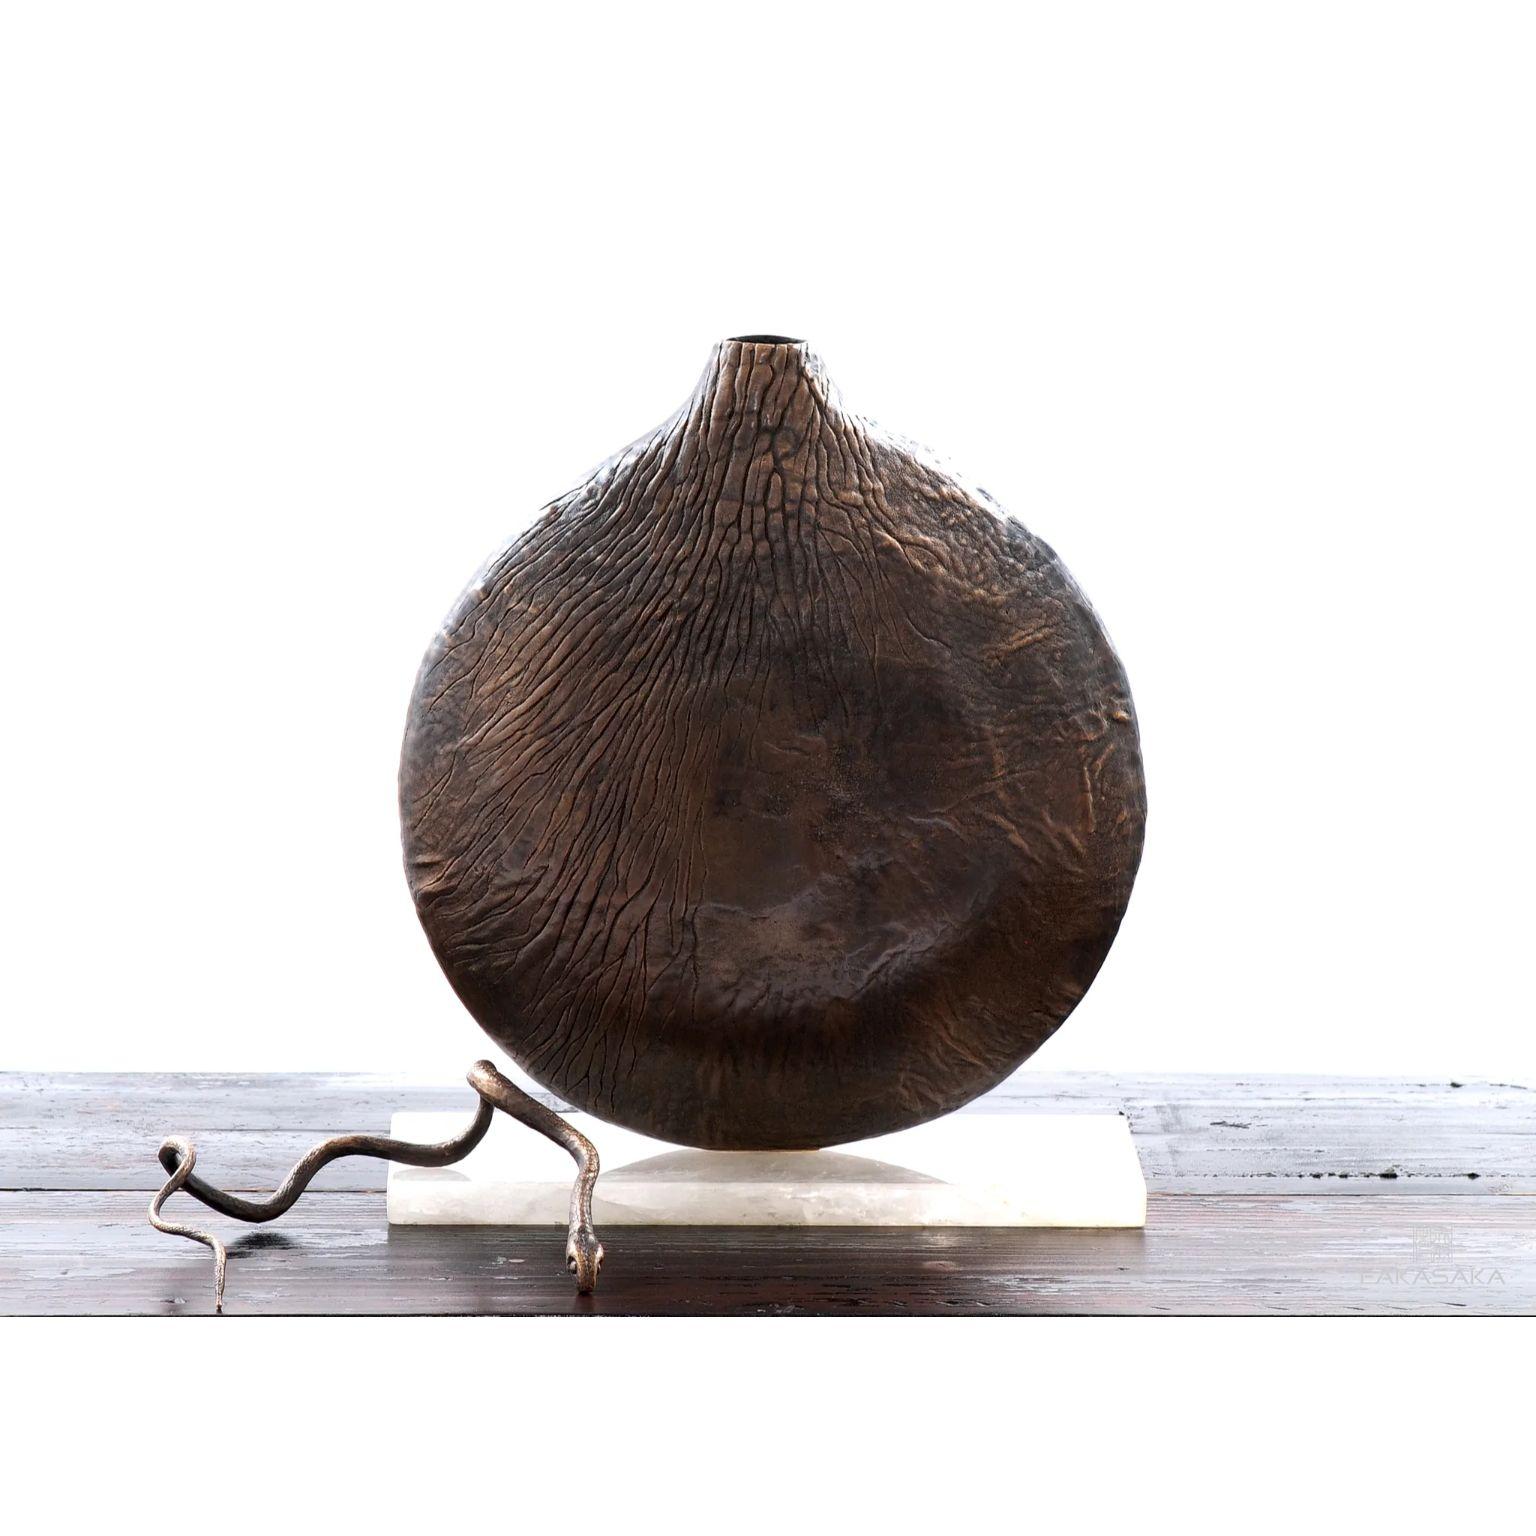 Supert vase by Fakasaka Design
Dimensions: W 35.5 cm D 15cm H 41 cm.
Materials: Dark bronze.

 FAKASAKA is a design company focused on production of high-end furniture, lighting, decorative objects, jewels, and accessories.

Established in